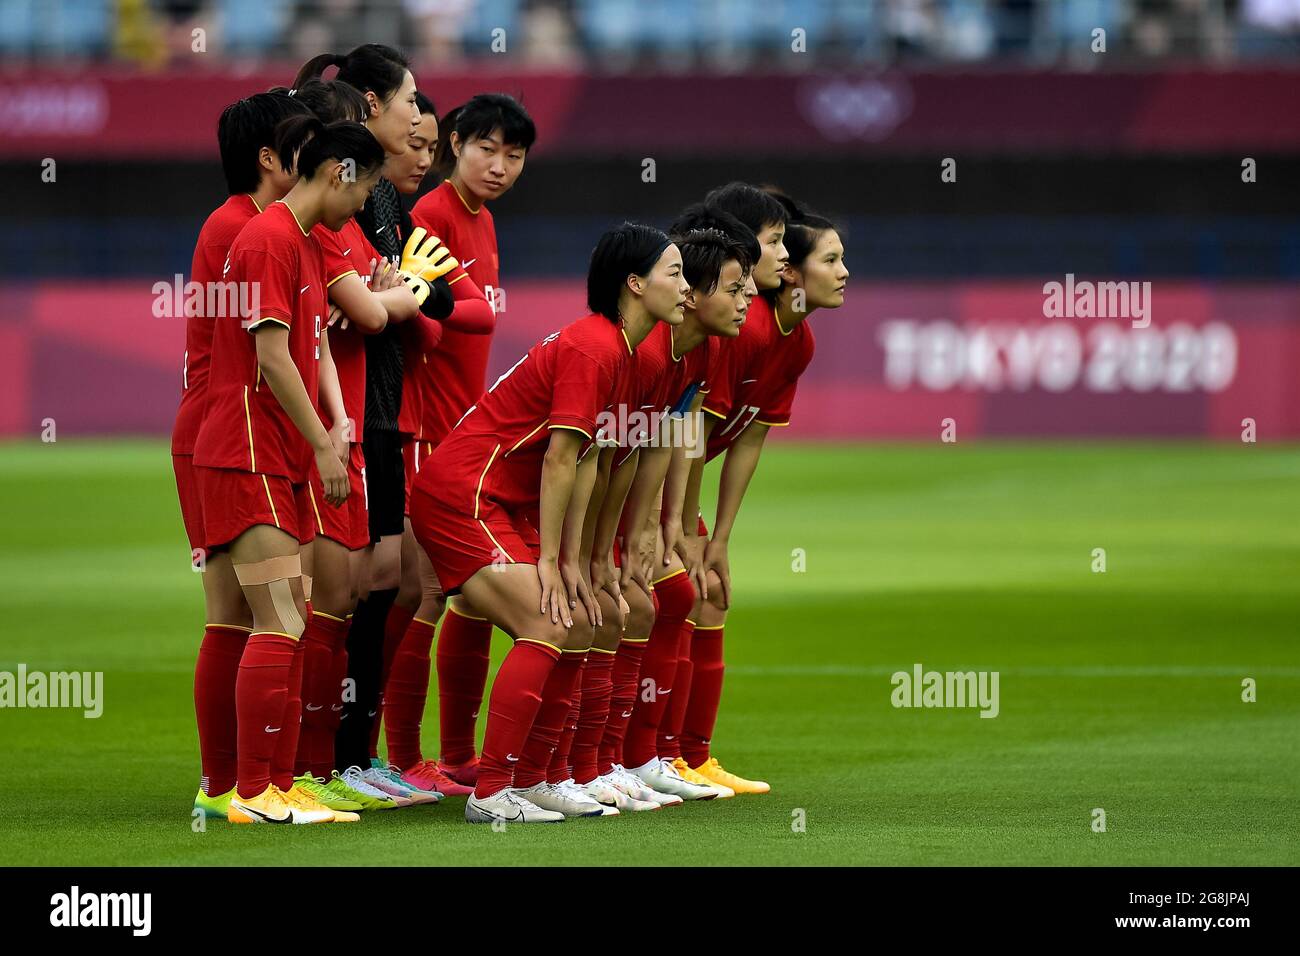 RIFU, JAPAN - JULY 21: Team of China line up for a teamphoto during the Tokyo 2020 Olympic Football Tournament match between China and Brazil at Miyagi Stadium on July 21, 2021 in Rifu, Japan (Photo by Pablo Morano/Orange Pictures) Stock Photo